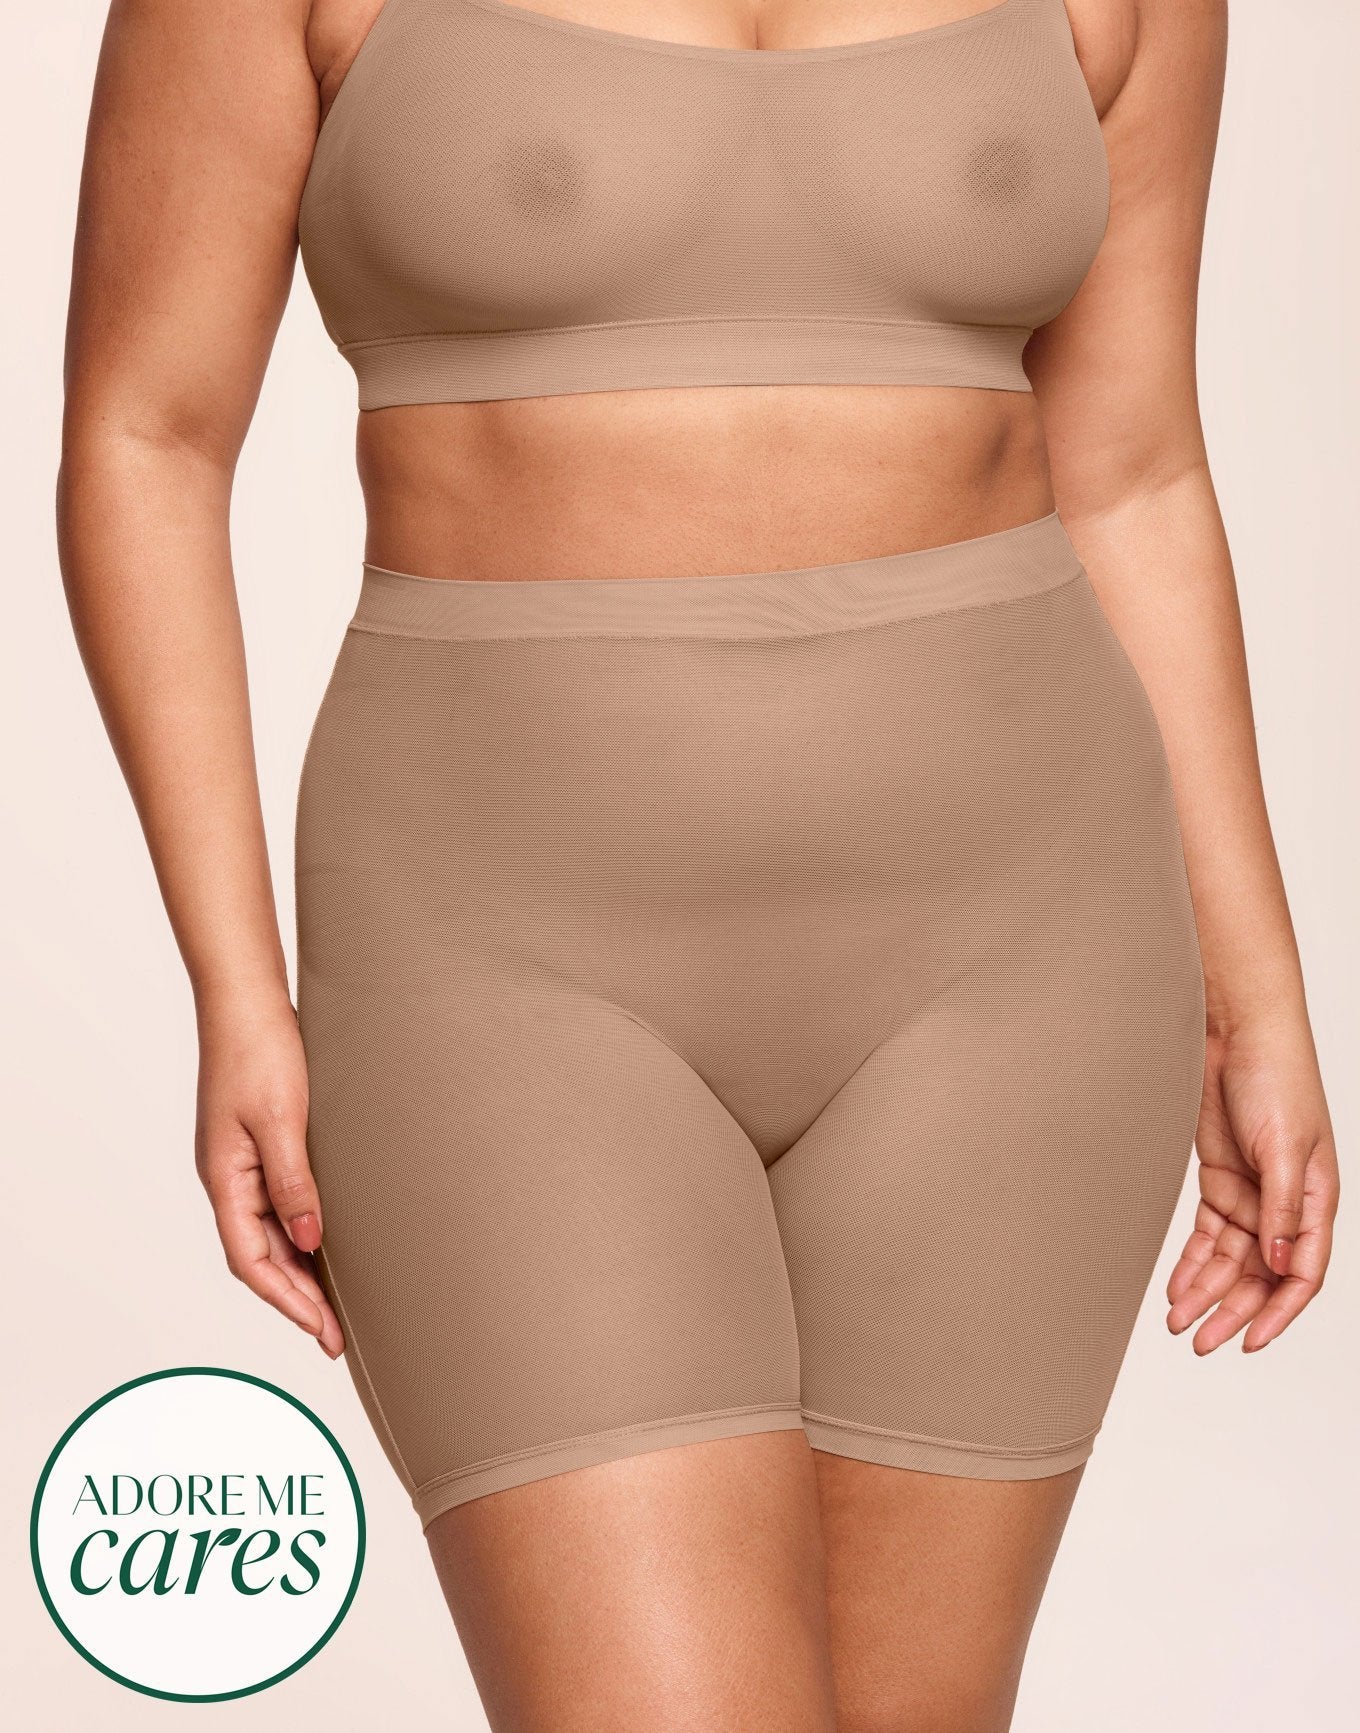 nueskin Dina Mesh High-Rise Shortie in color Macaroon and shape shortie